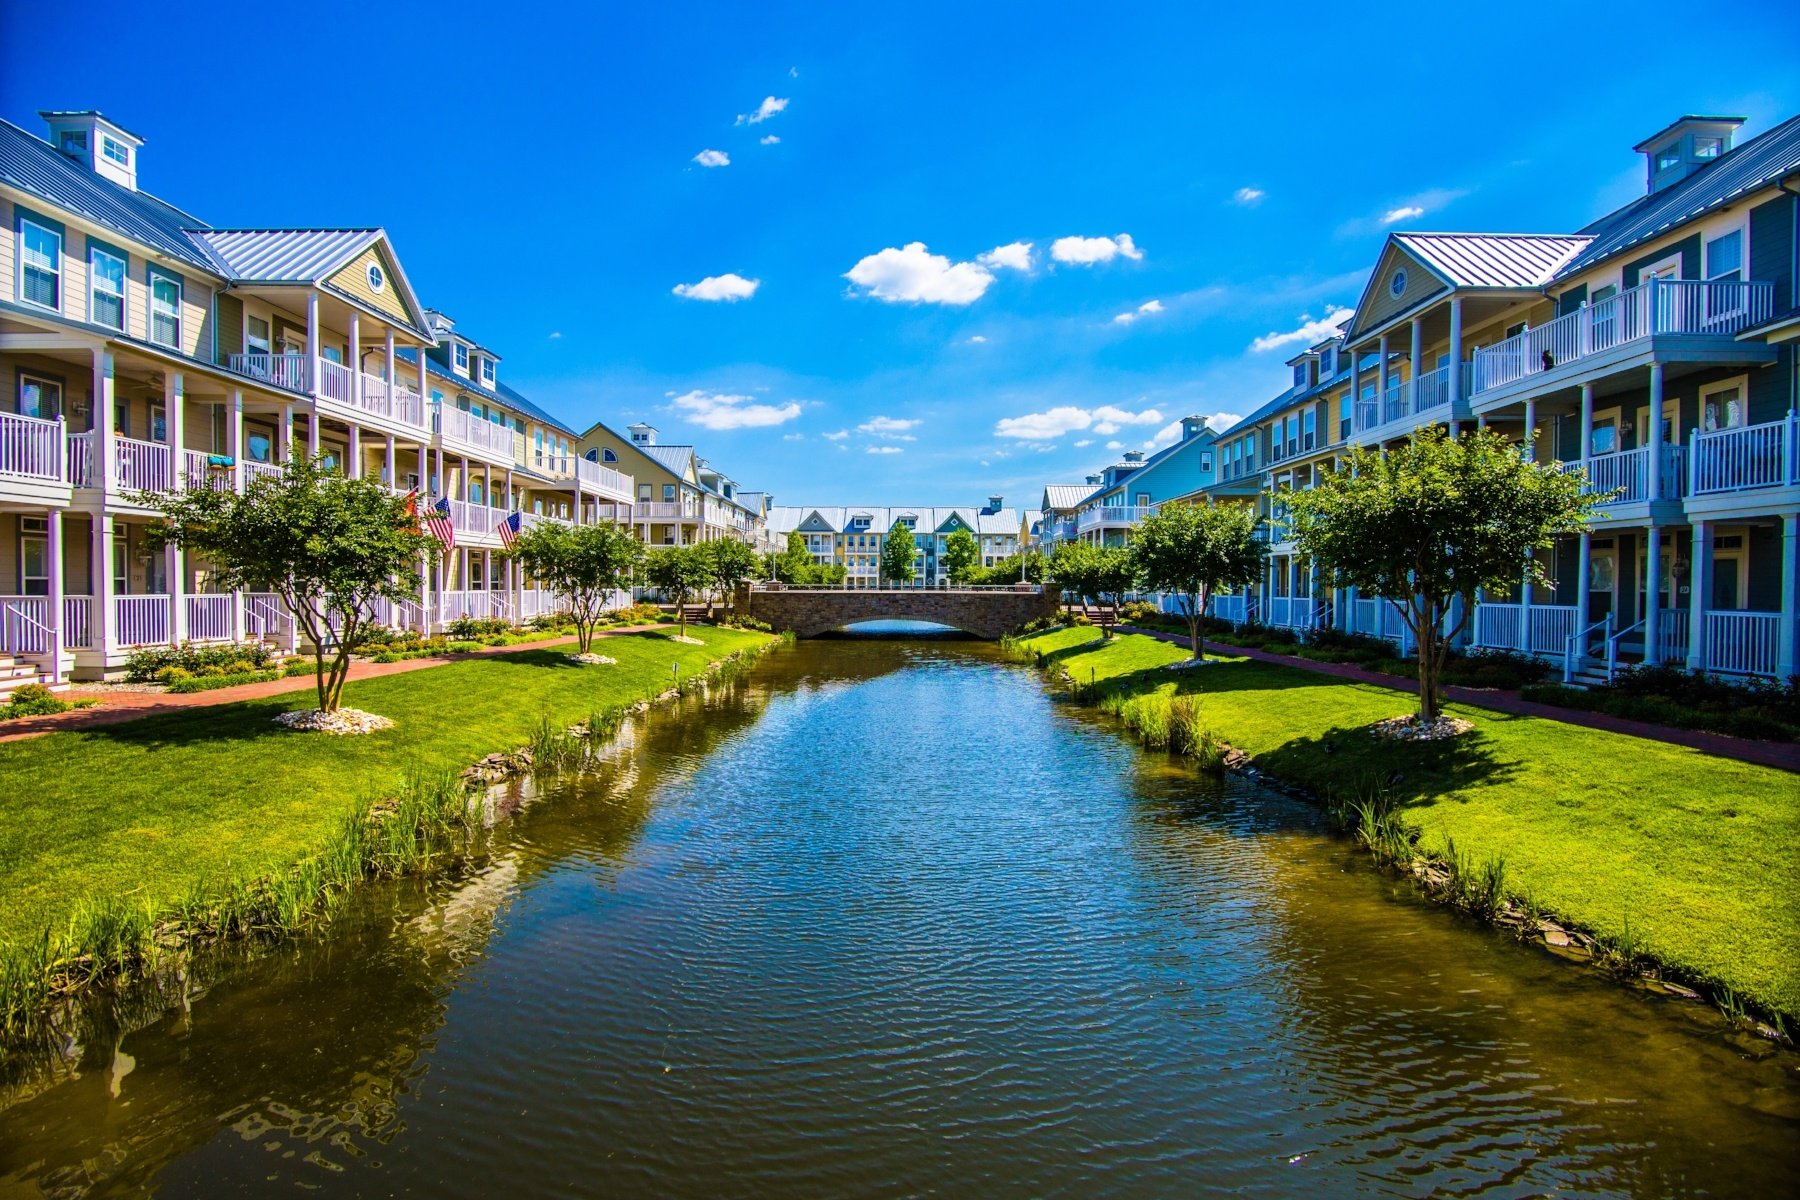 Sunset_Island_Ocean_City_MD_Center_Pond_View_Condos_Townhomes_1800x1200.jpg